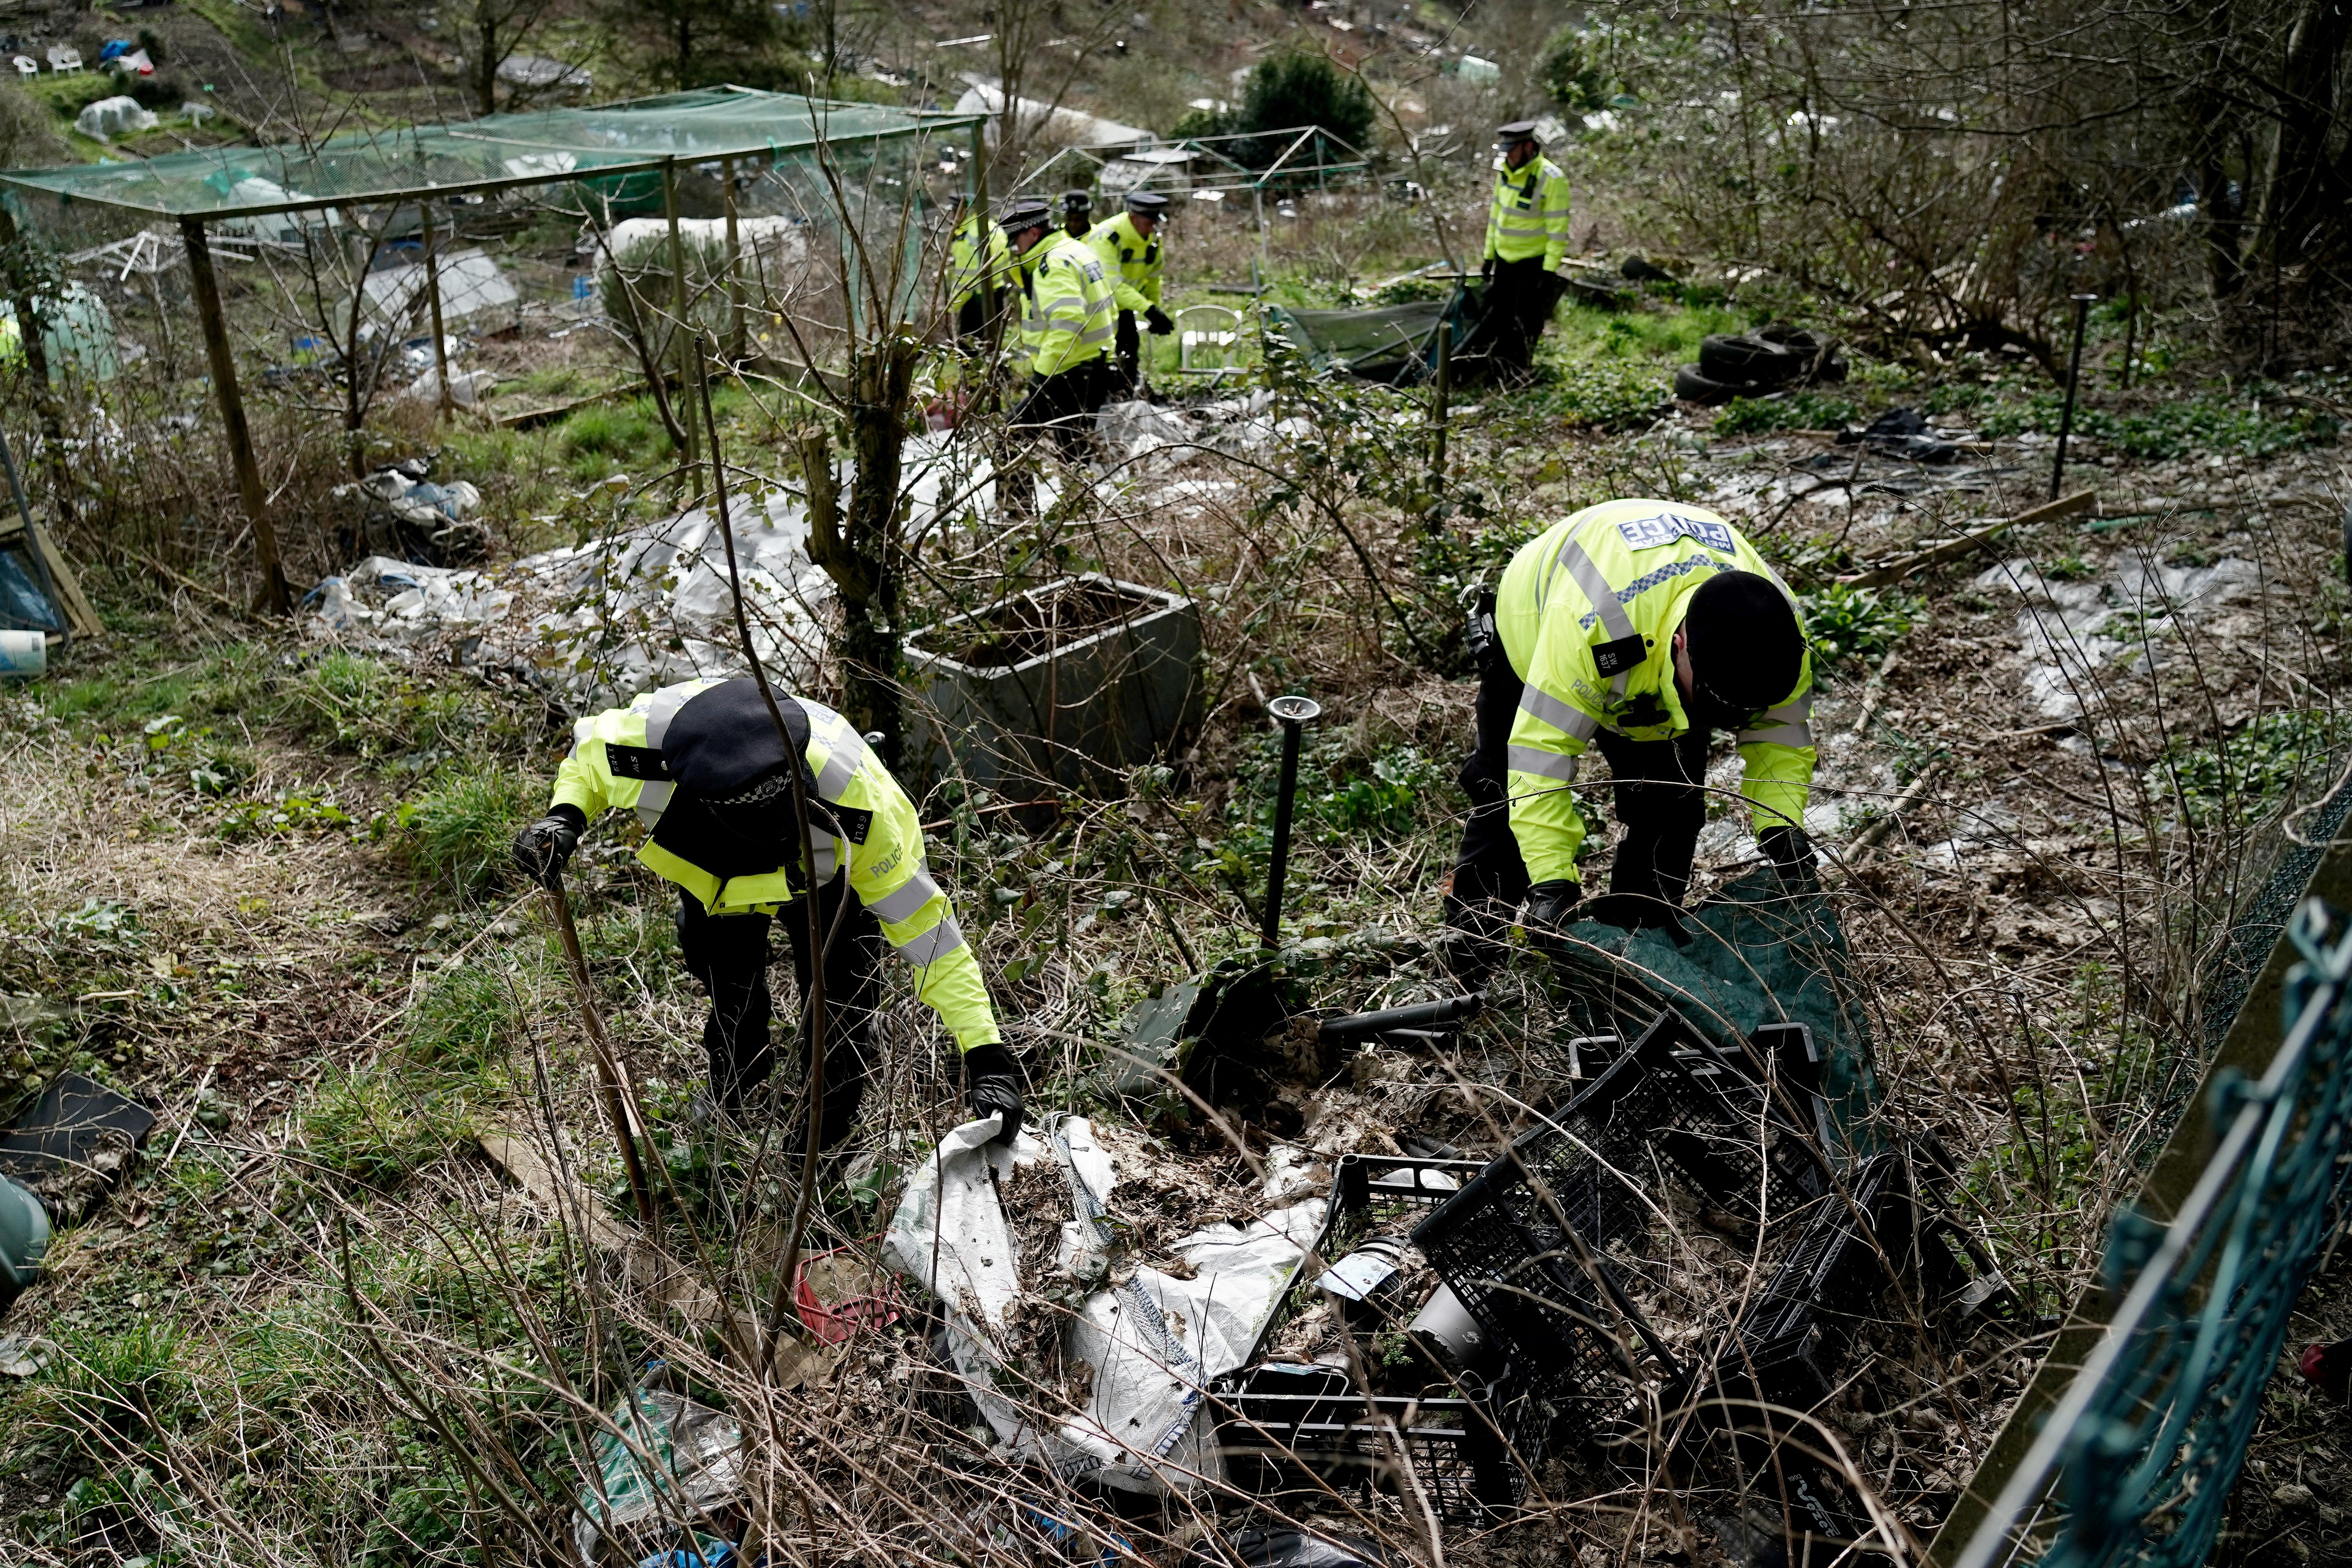 Police searched allotments near the site where the couple were arrested